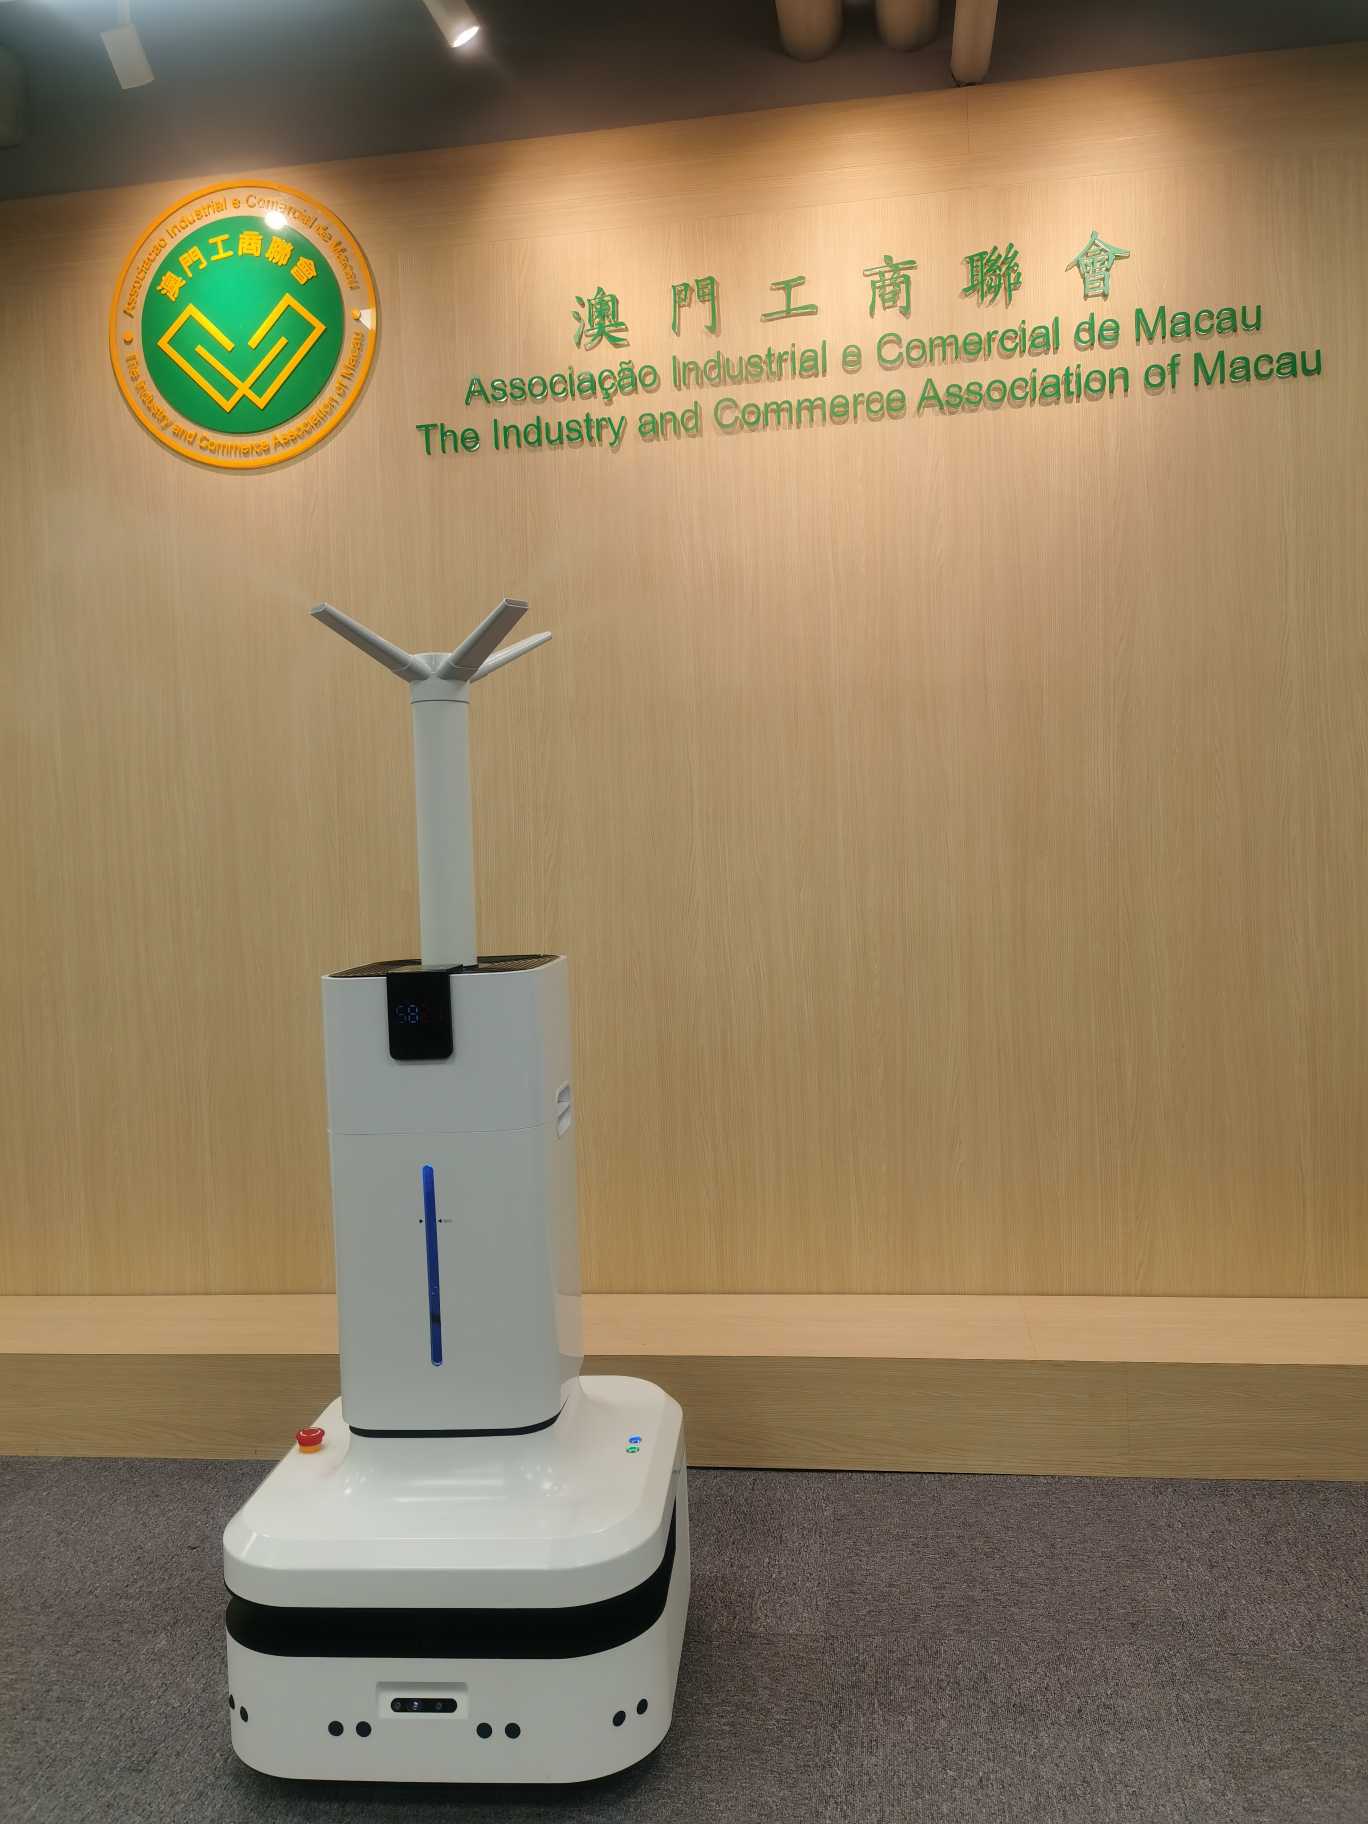 Guangdong Robot Association and UNIPIN Robot visited Macao Federation of Industry and Commerce to seek new opportunities and new cooperation